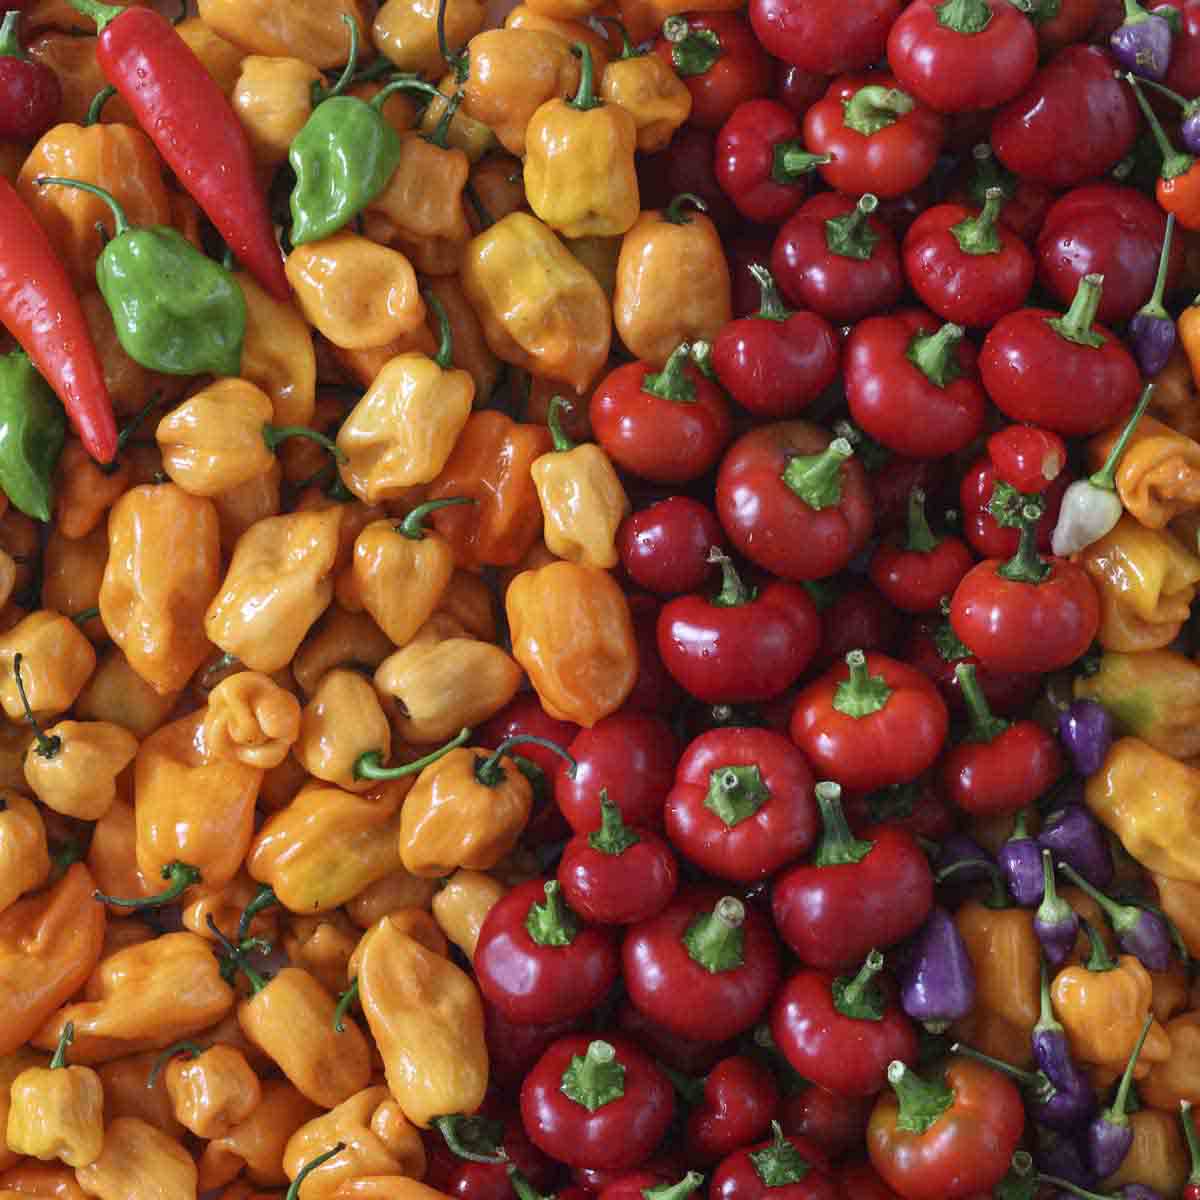 A variety of green, orange, red and purple peppers.